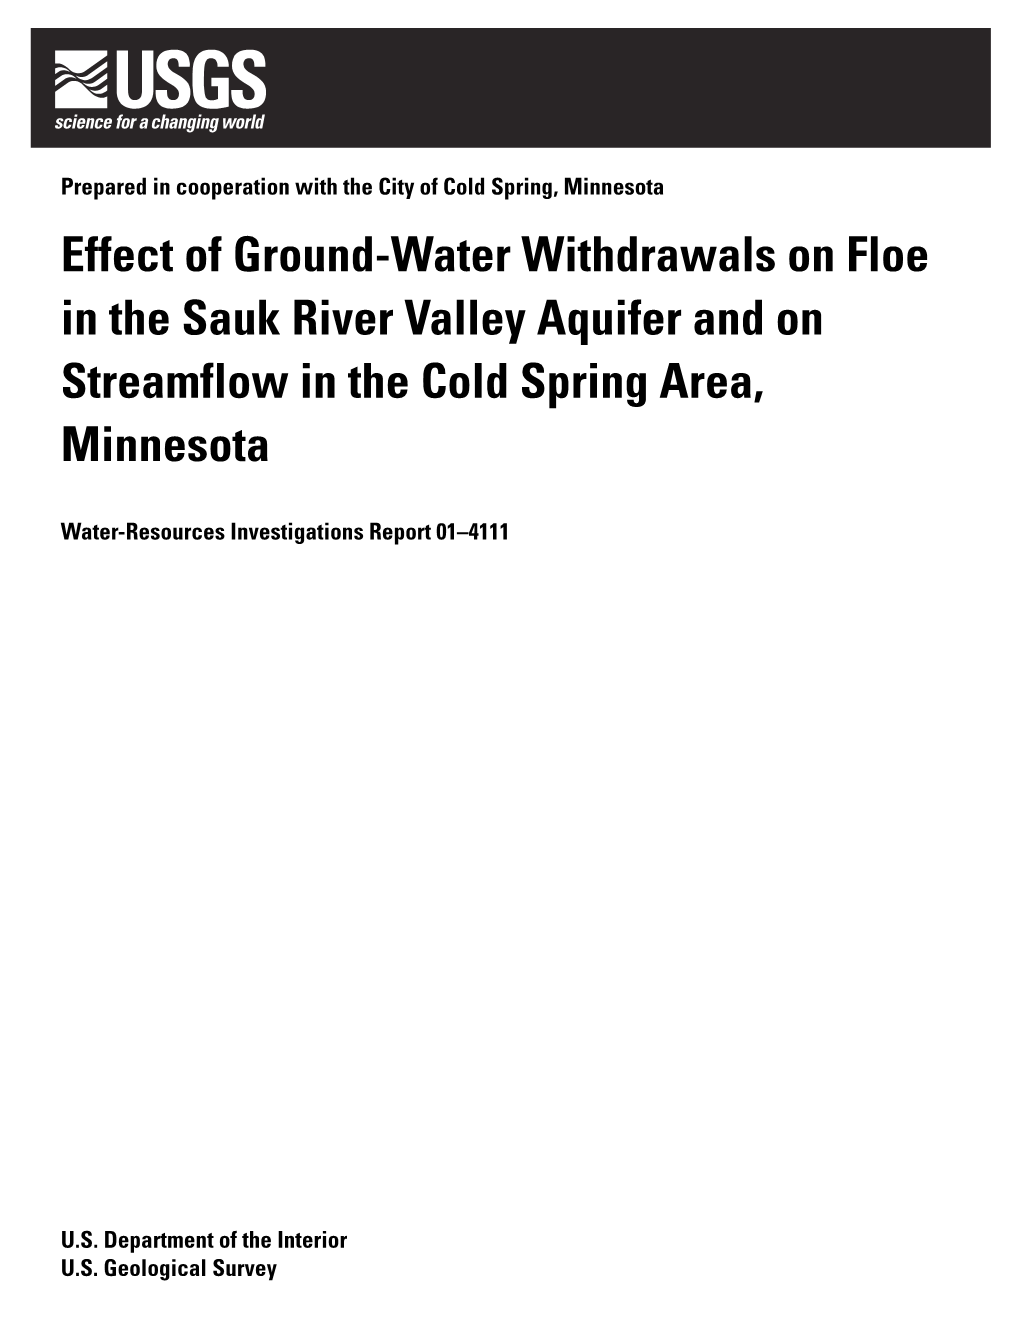 Effect of Ground-Water Withdrawals on Floe in the Sauk River Valley Aquifer and on Streamflow in the Cold Spring Area, Minnesota